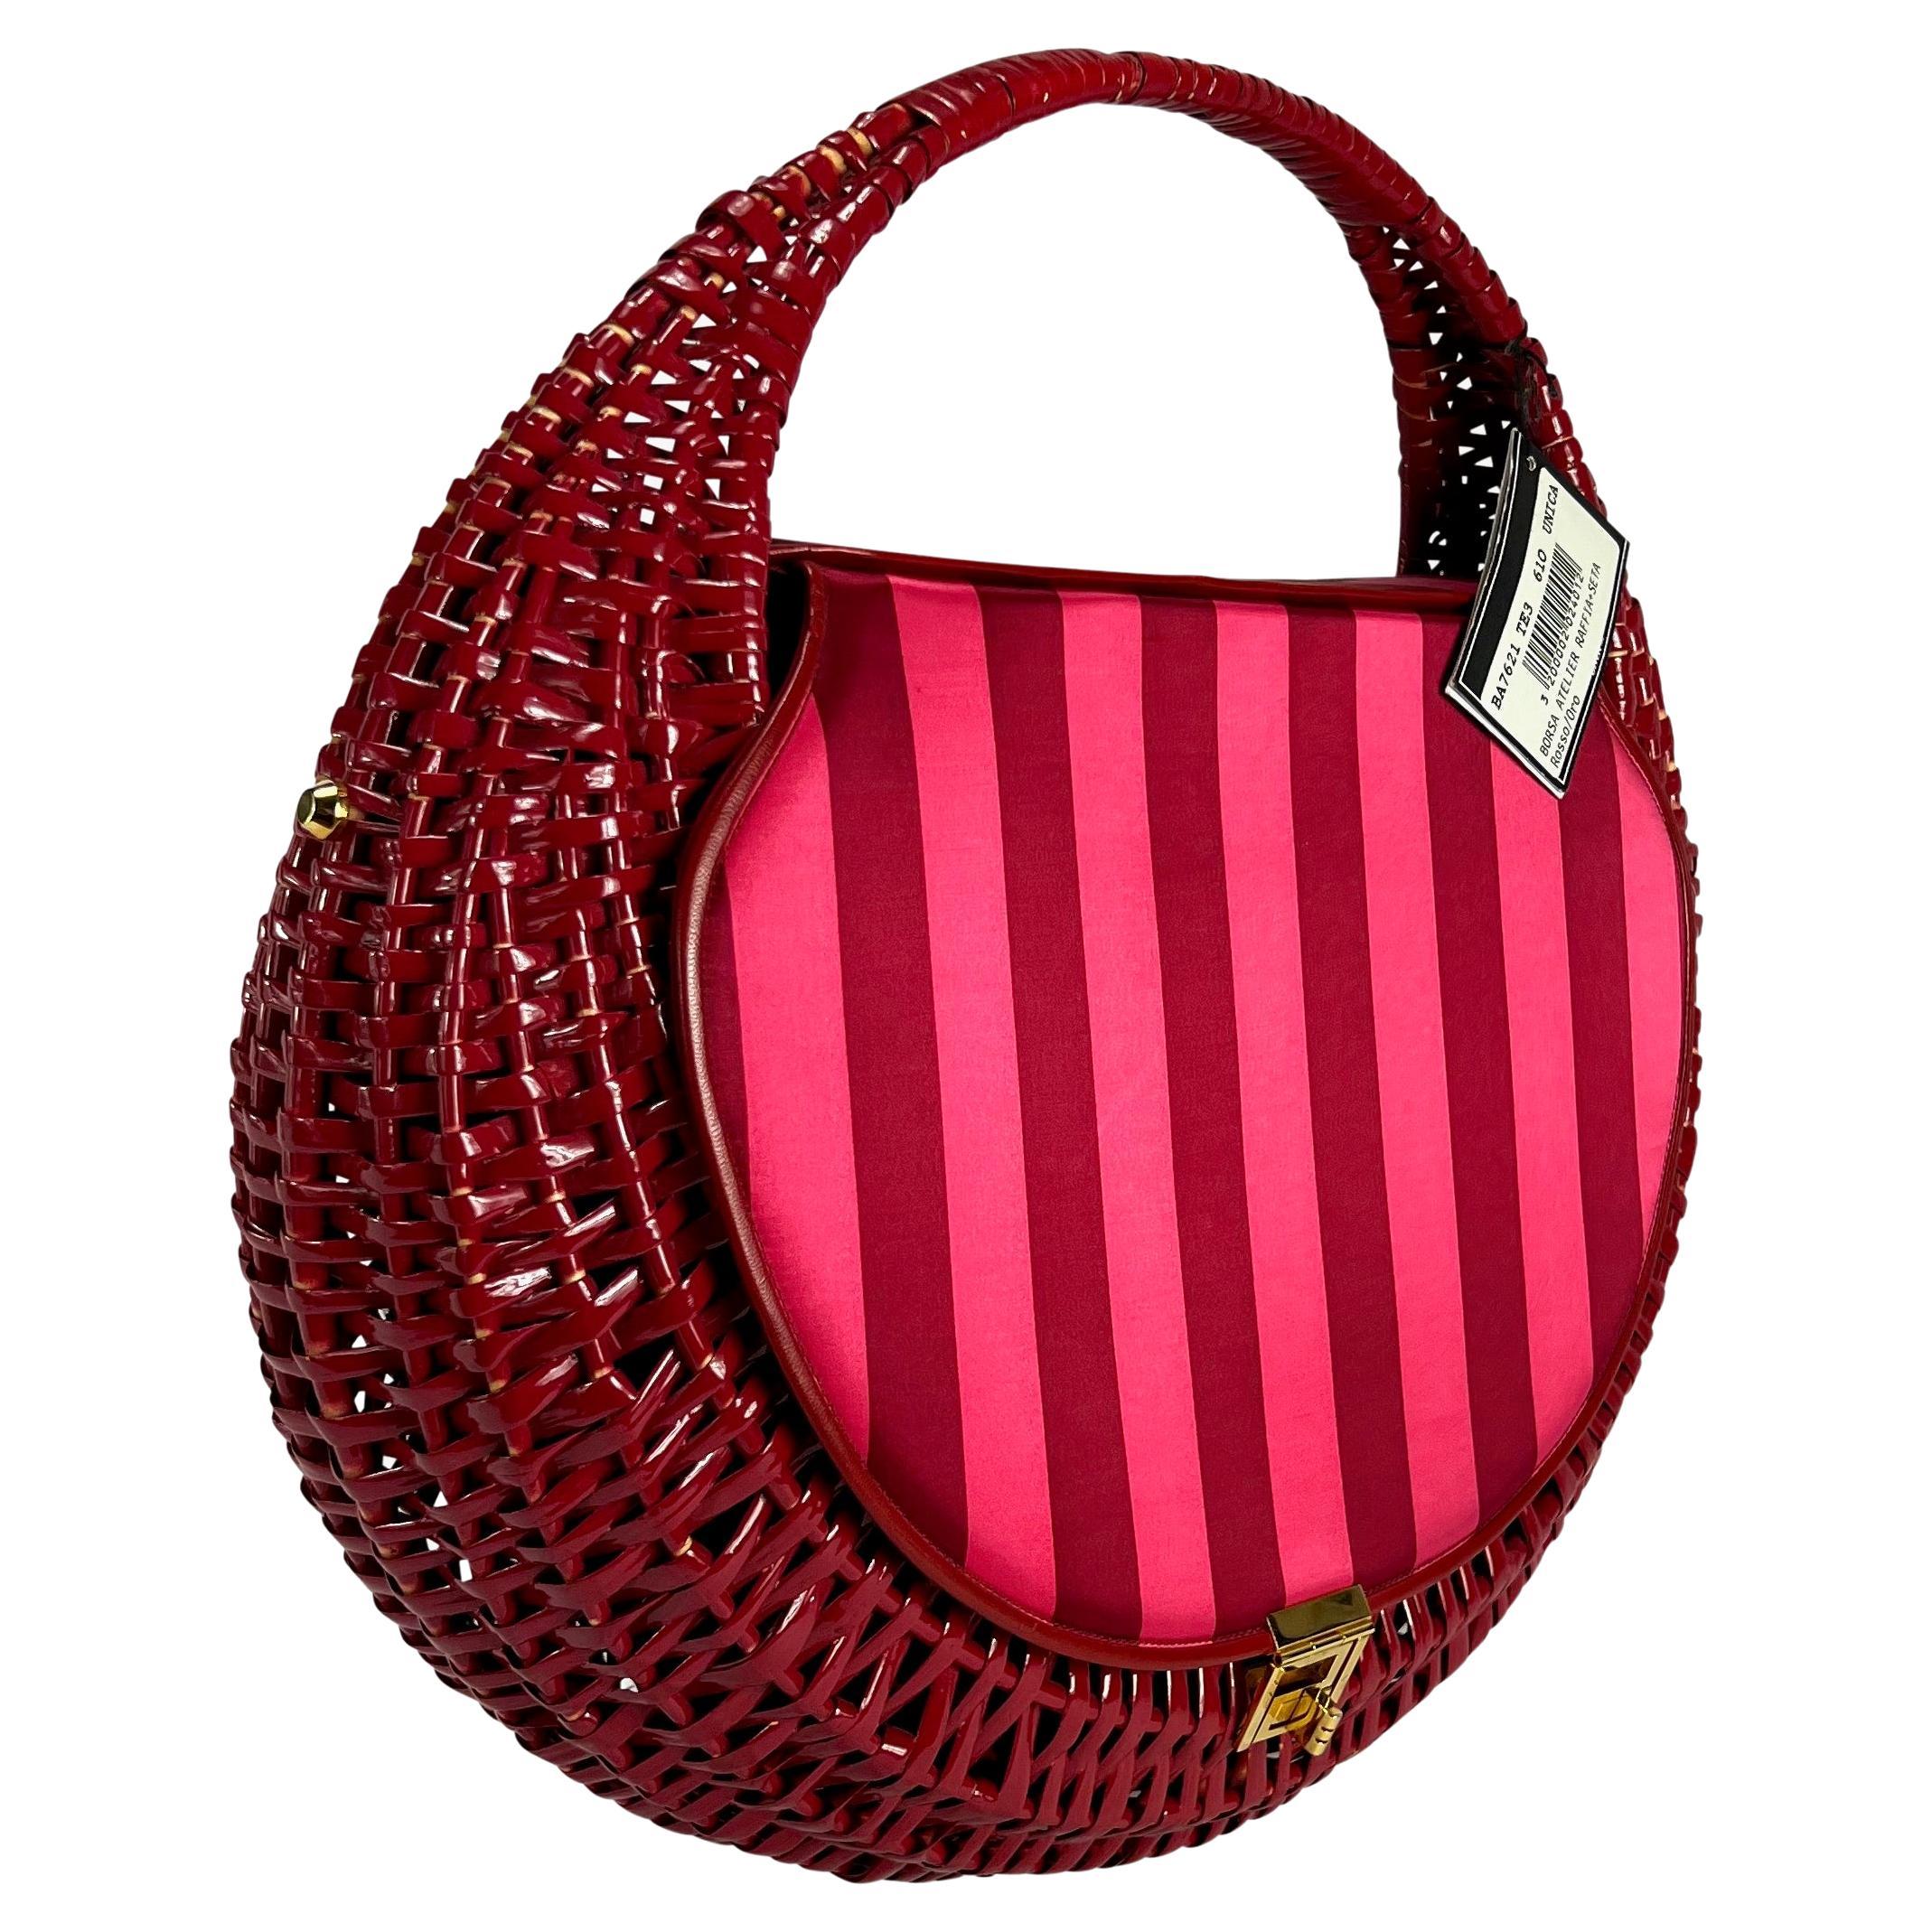 NWT S/S 2001 Atelier Versace by Donatella Versace Pink Satin and Wicker Bag For Sale 2